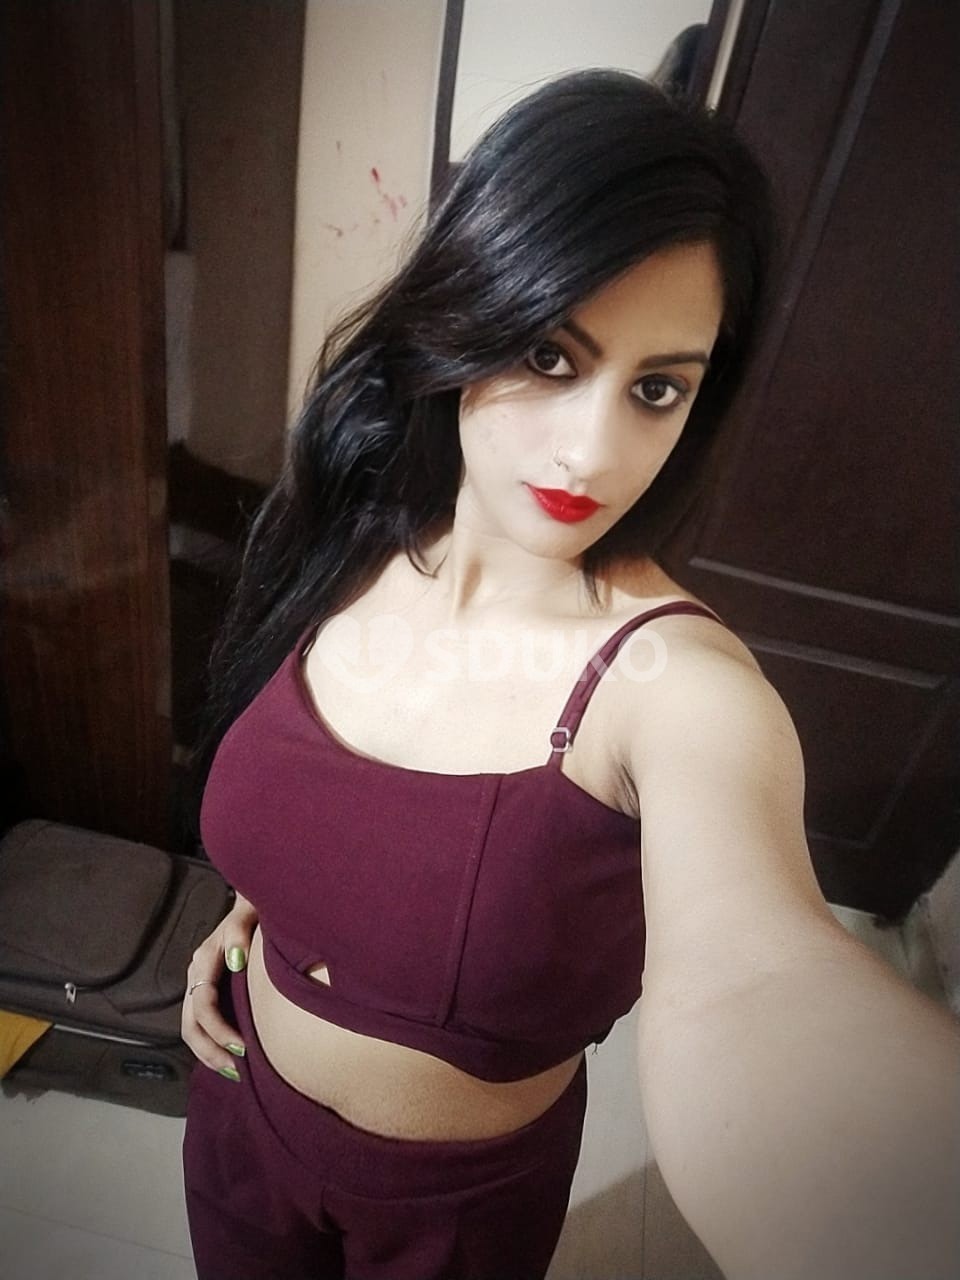 👌CALL 89284 PRACHI 18556 ONLY CASH PAYMENT (24x7)SERVICE FOR INDEPENDENT HIGH PROFILE NAGPUR CALL-GIRL AND HOT